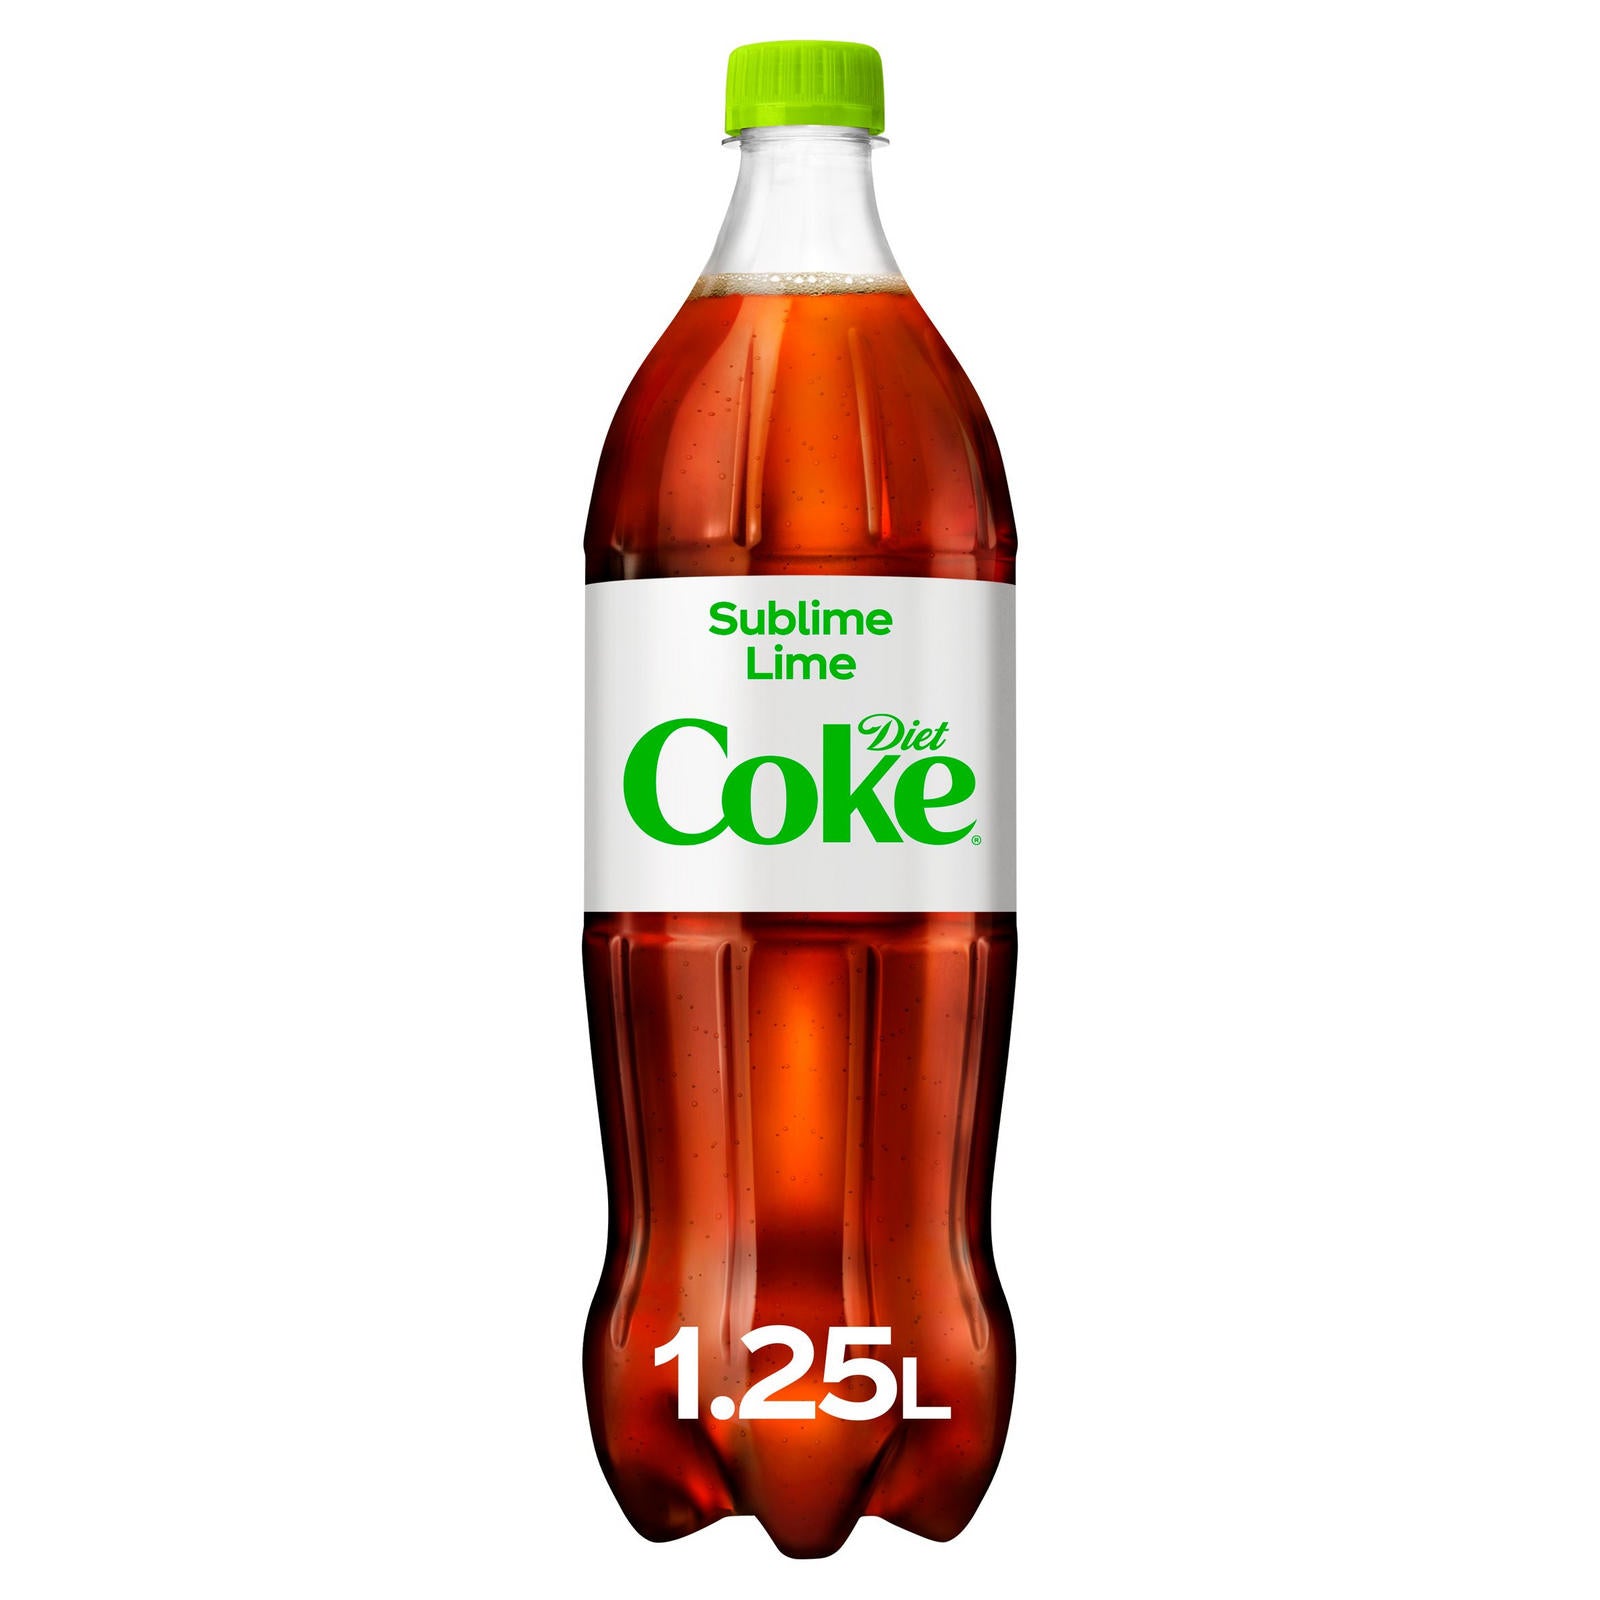 Coca Cola Lime Diet Coke 1.25L - Out of Date